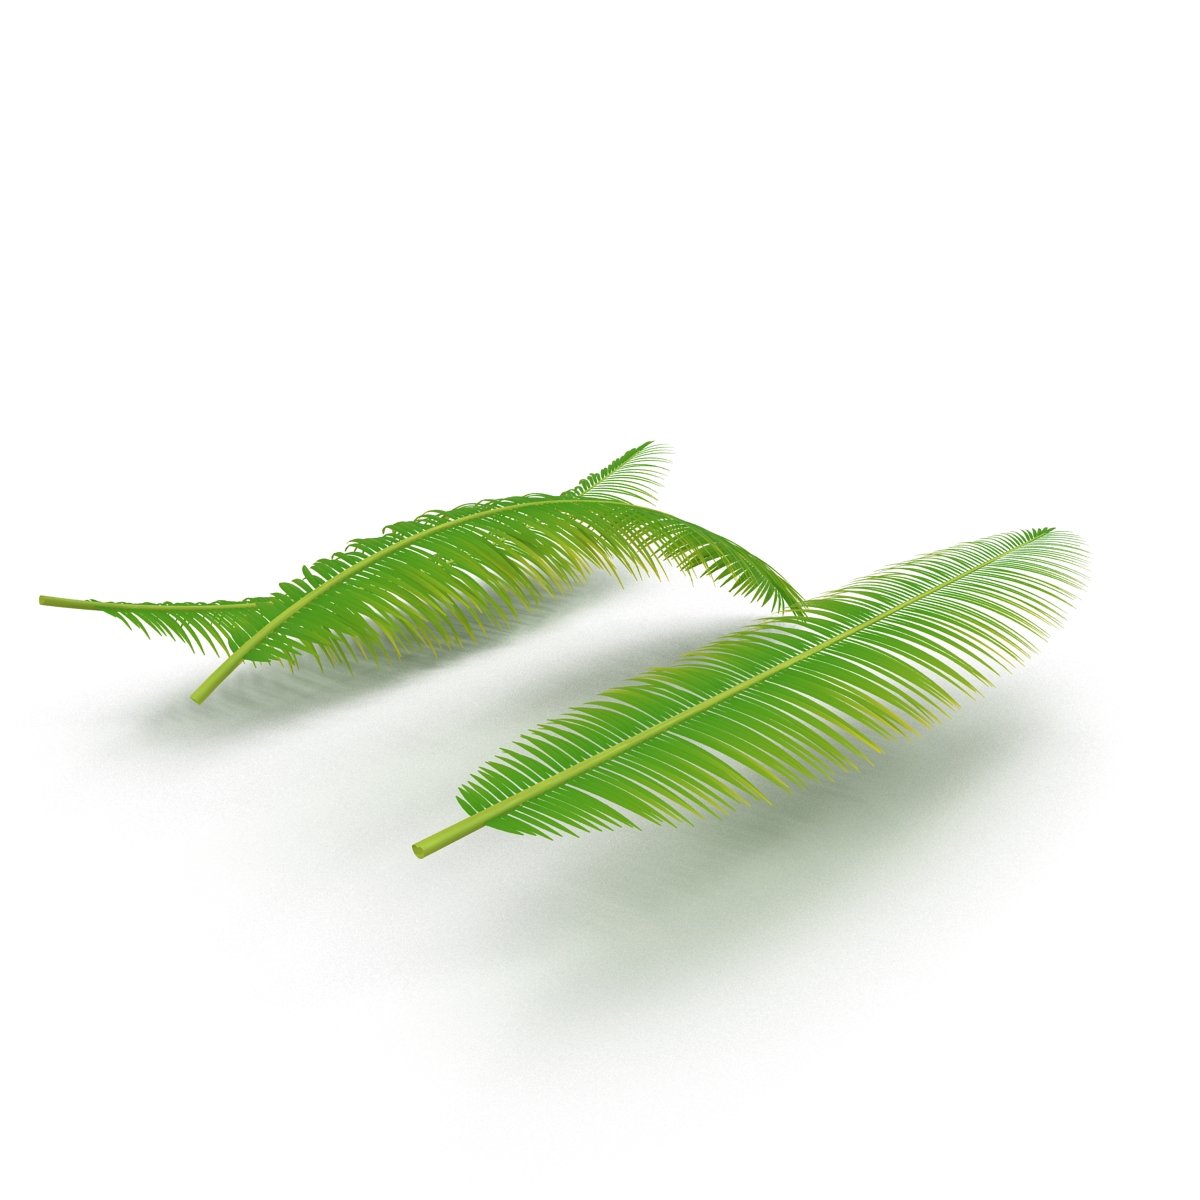 Two green leaves on a white background.